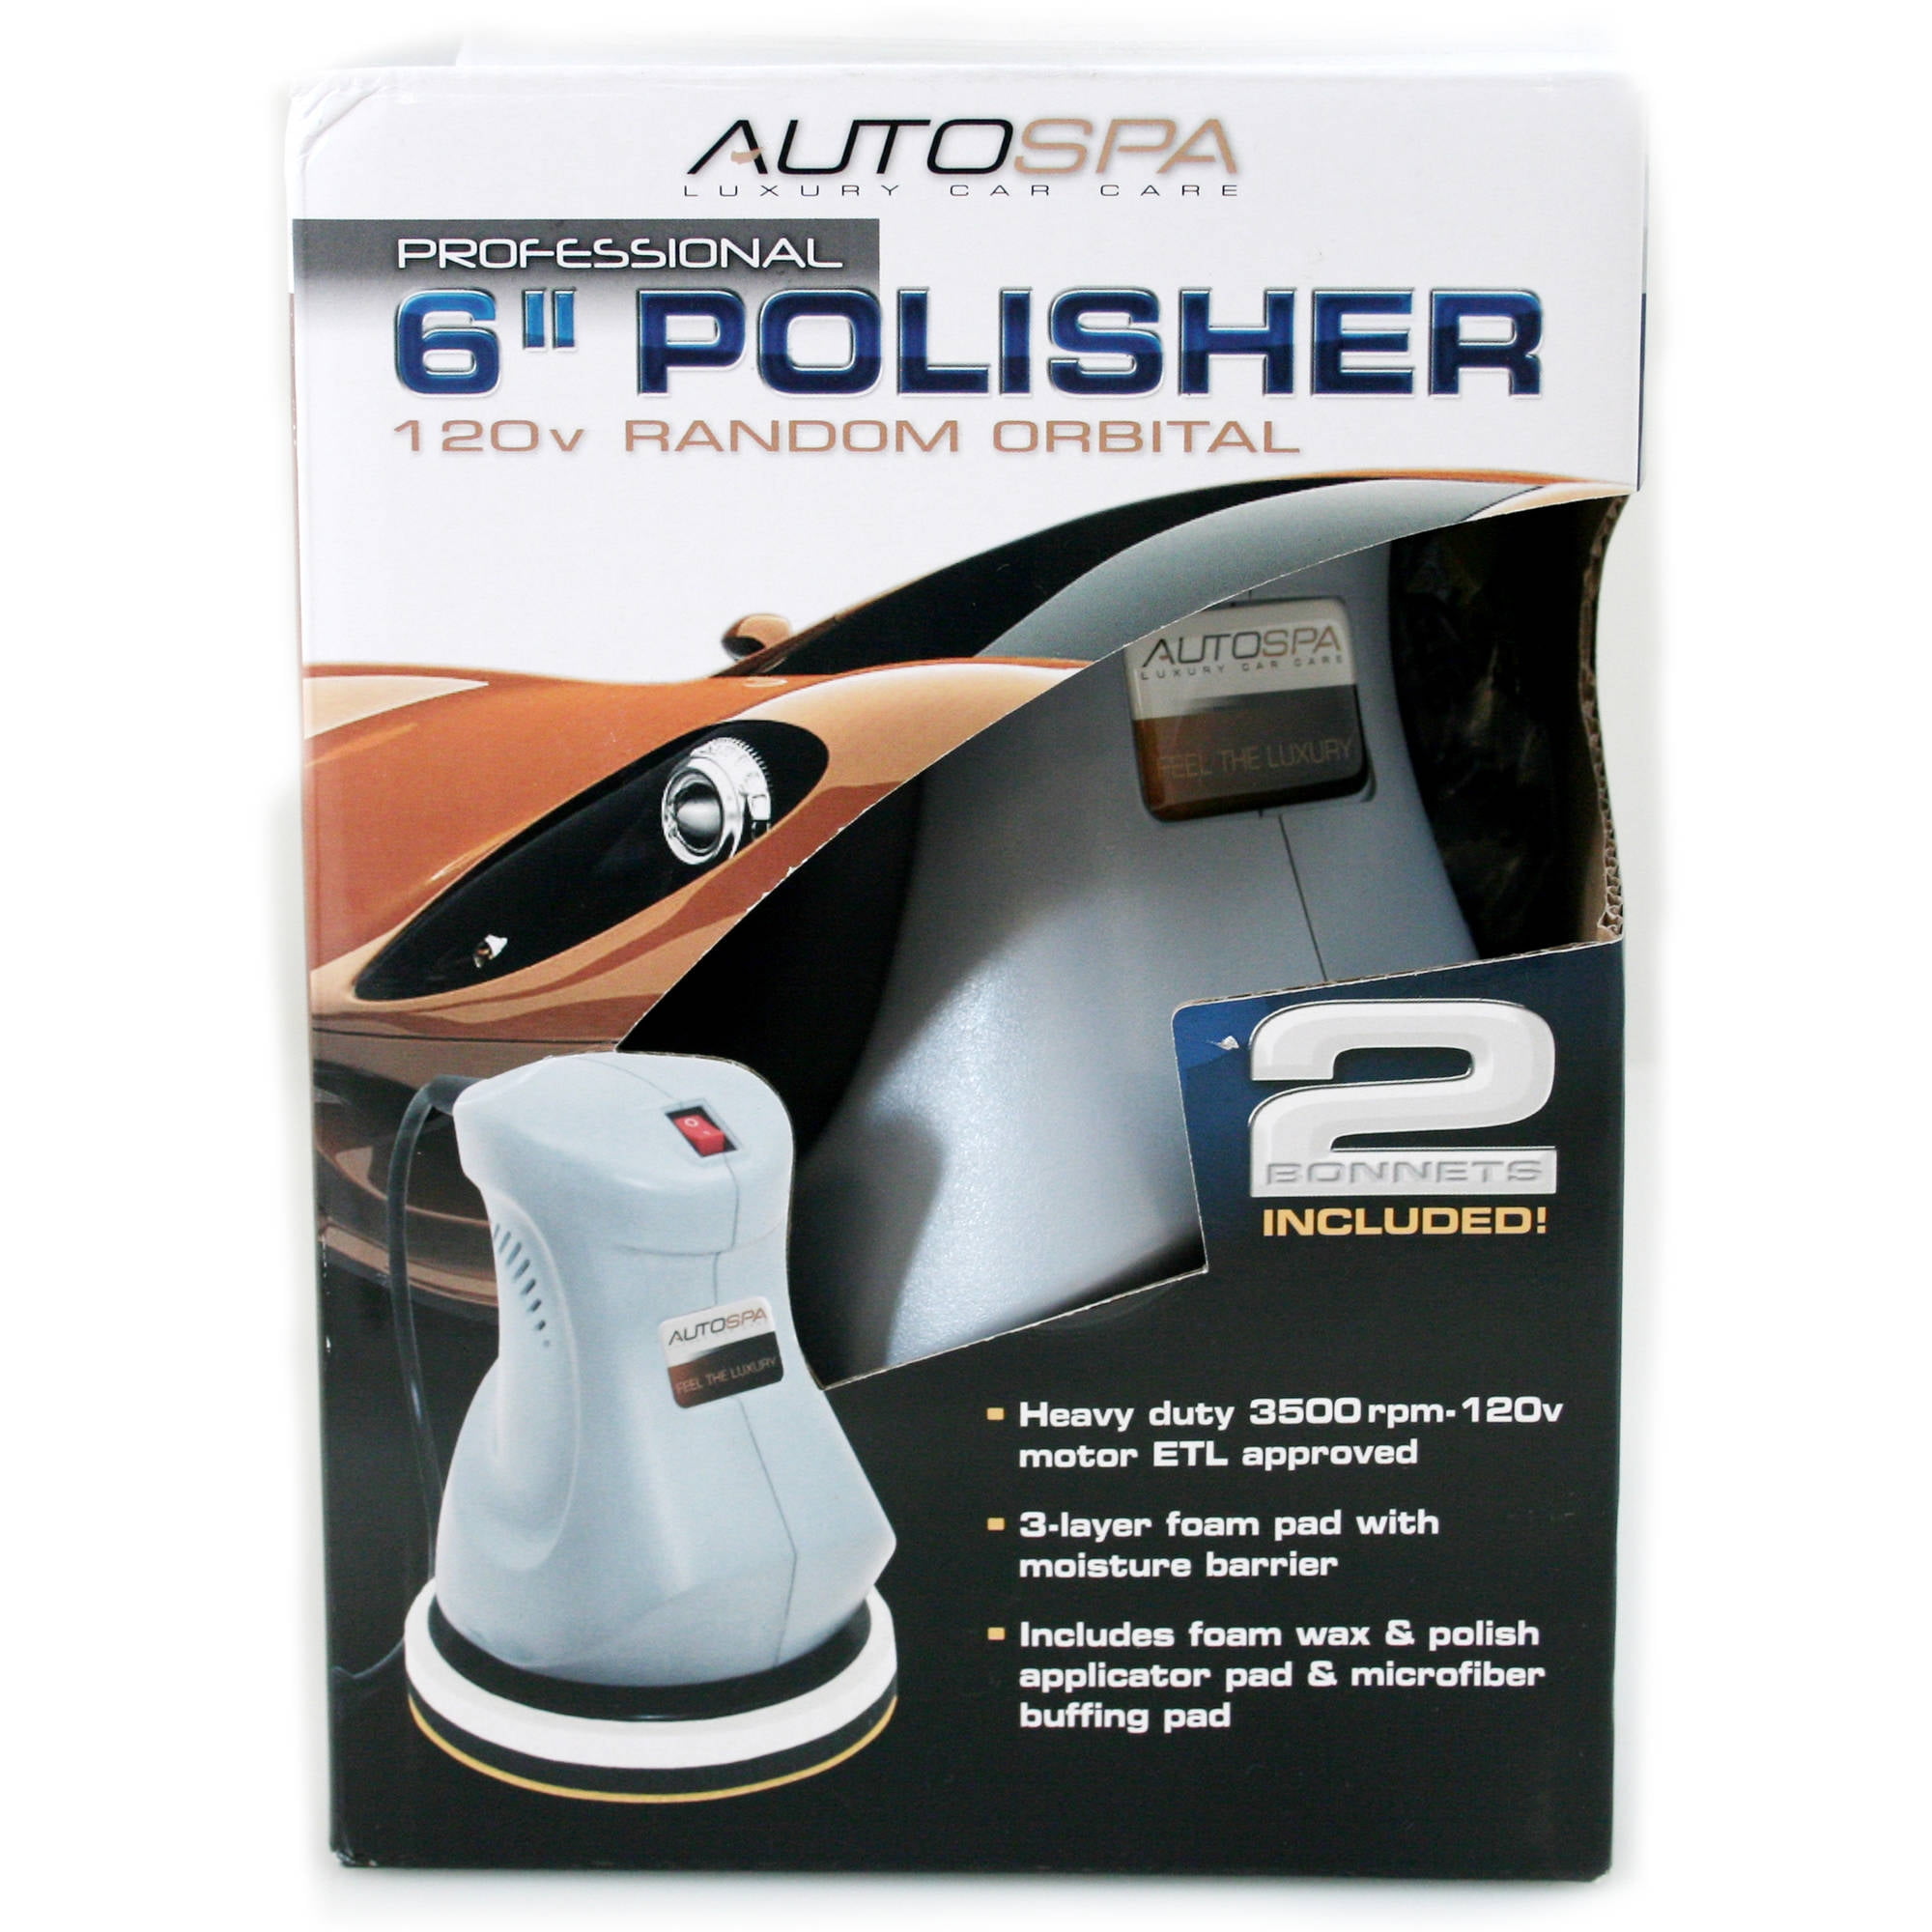 Can a Car Polisher Give You a Great Massage? — Self-Massage for